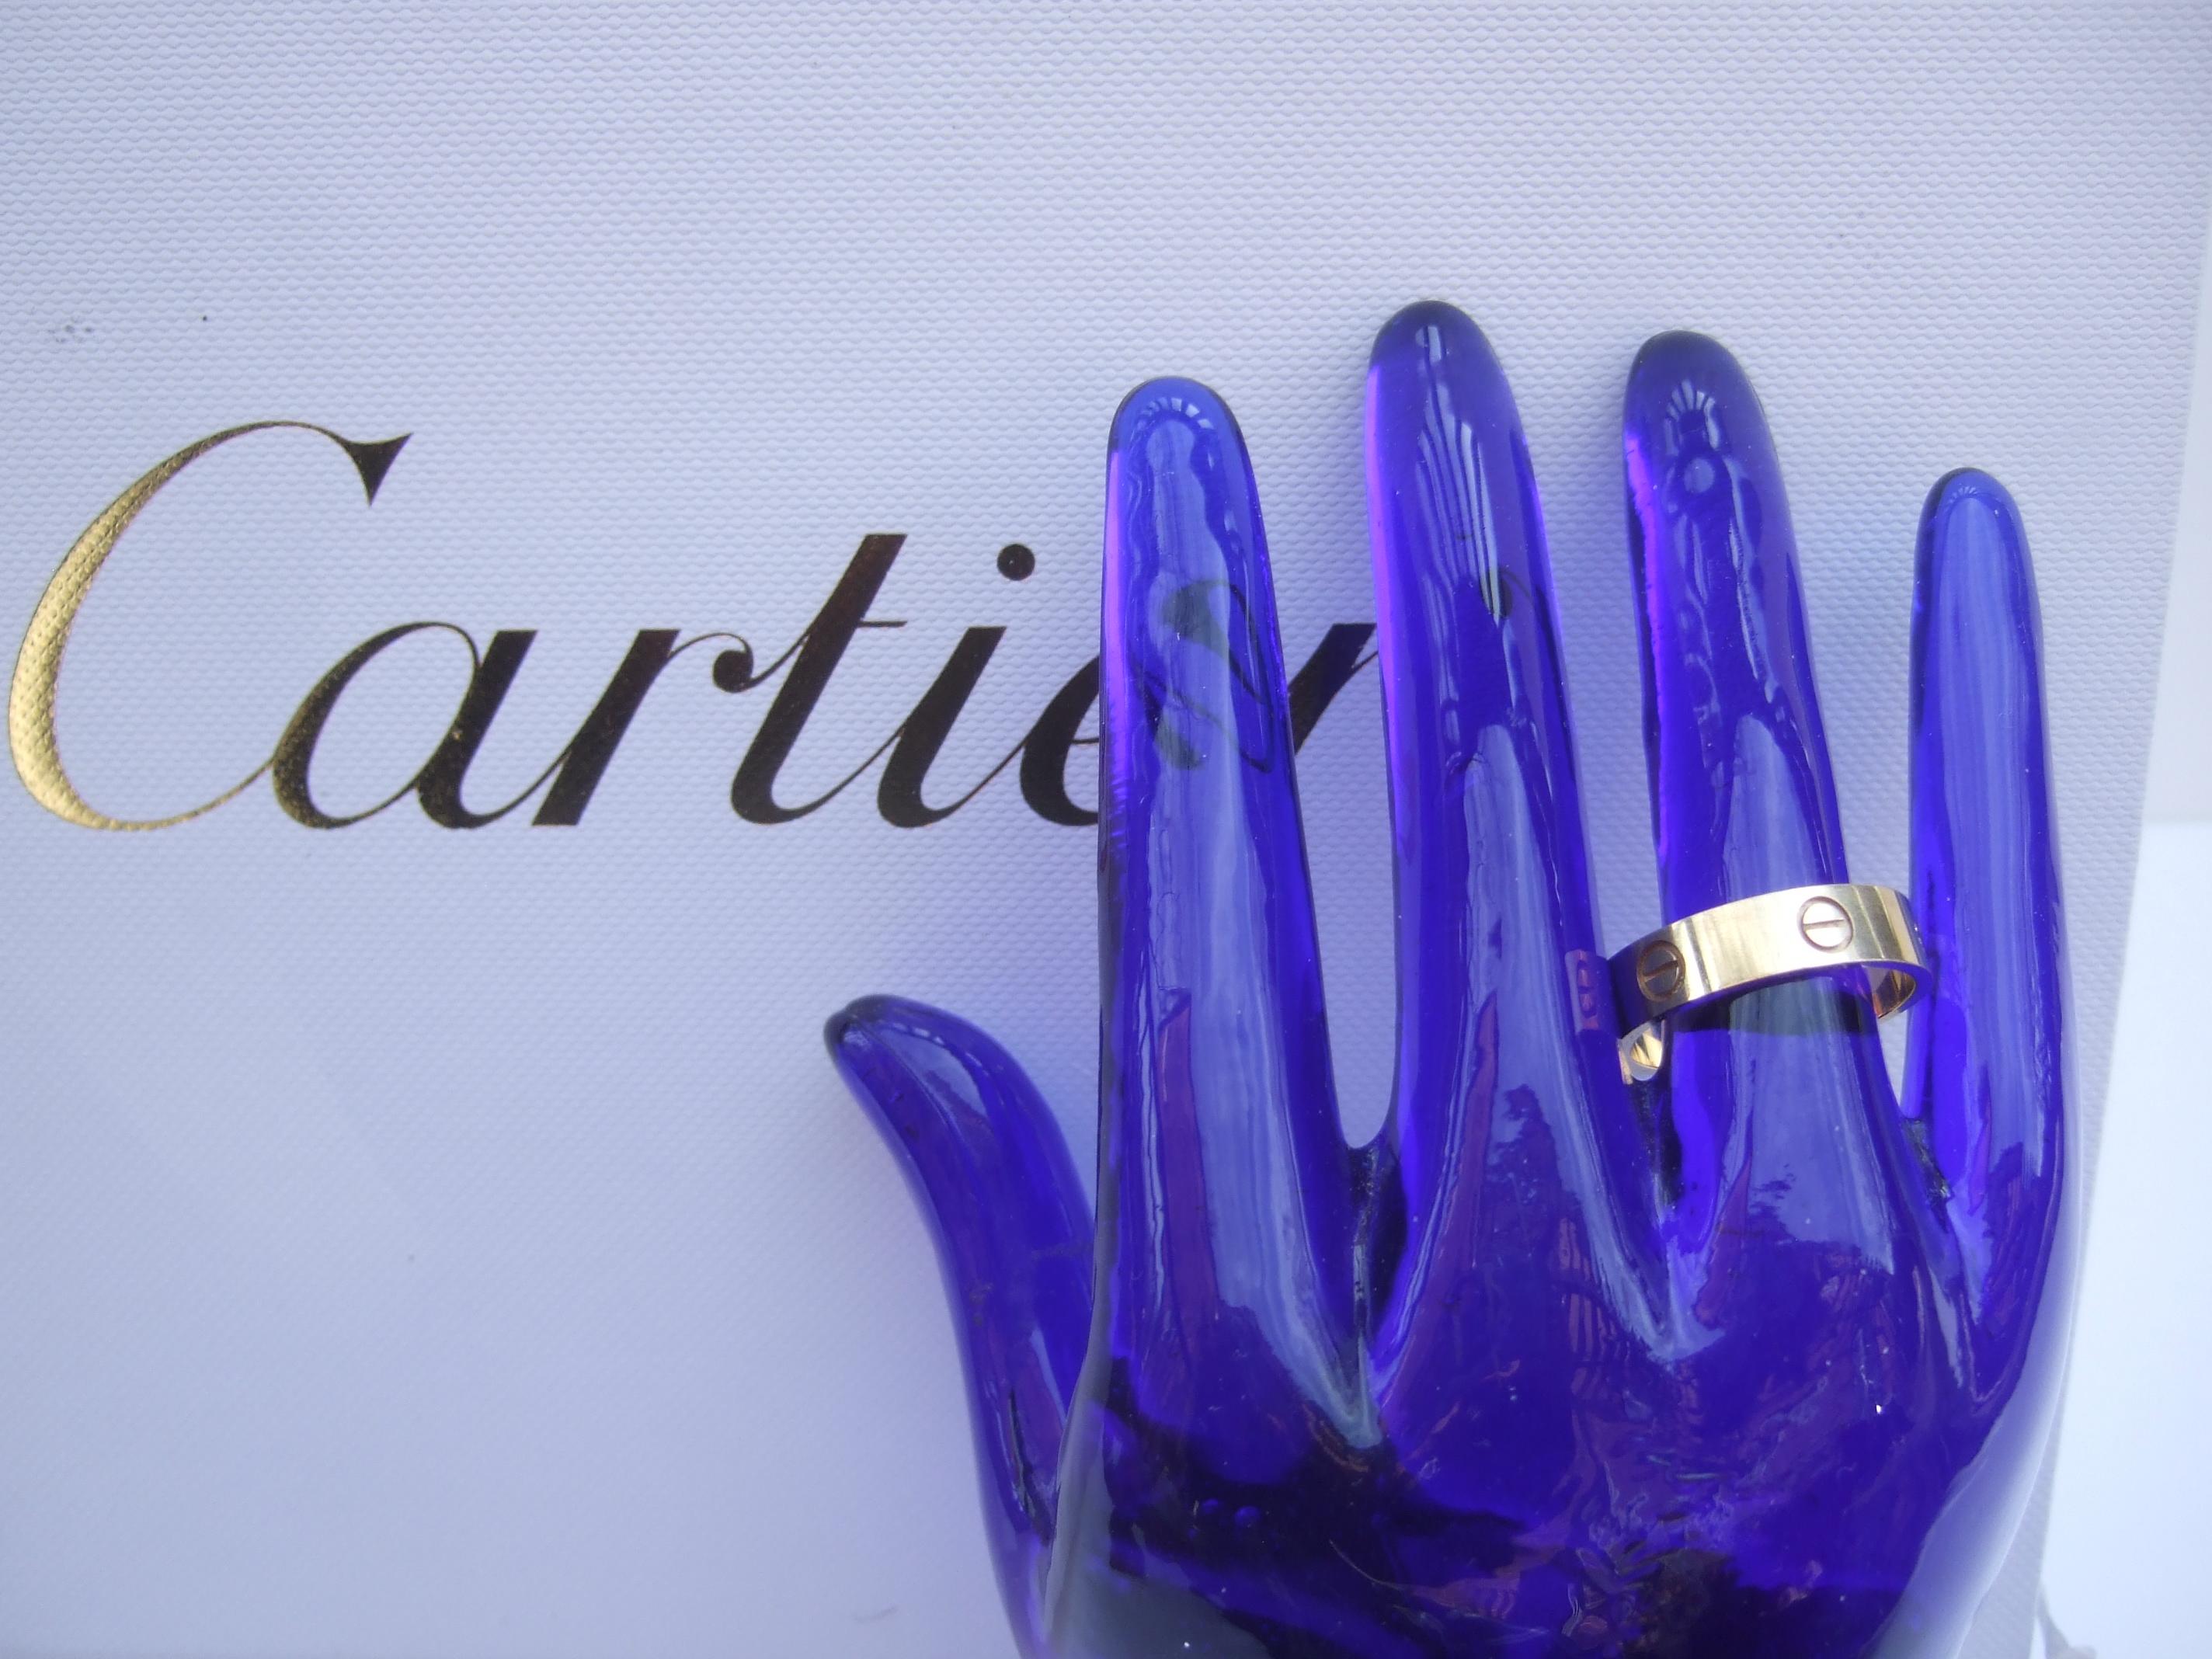 Cartier Yellow Gold 18kt Love Band Ring New in Cartier Box US Size 10 c 21st c  3